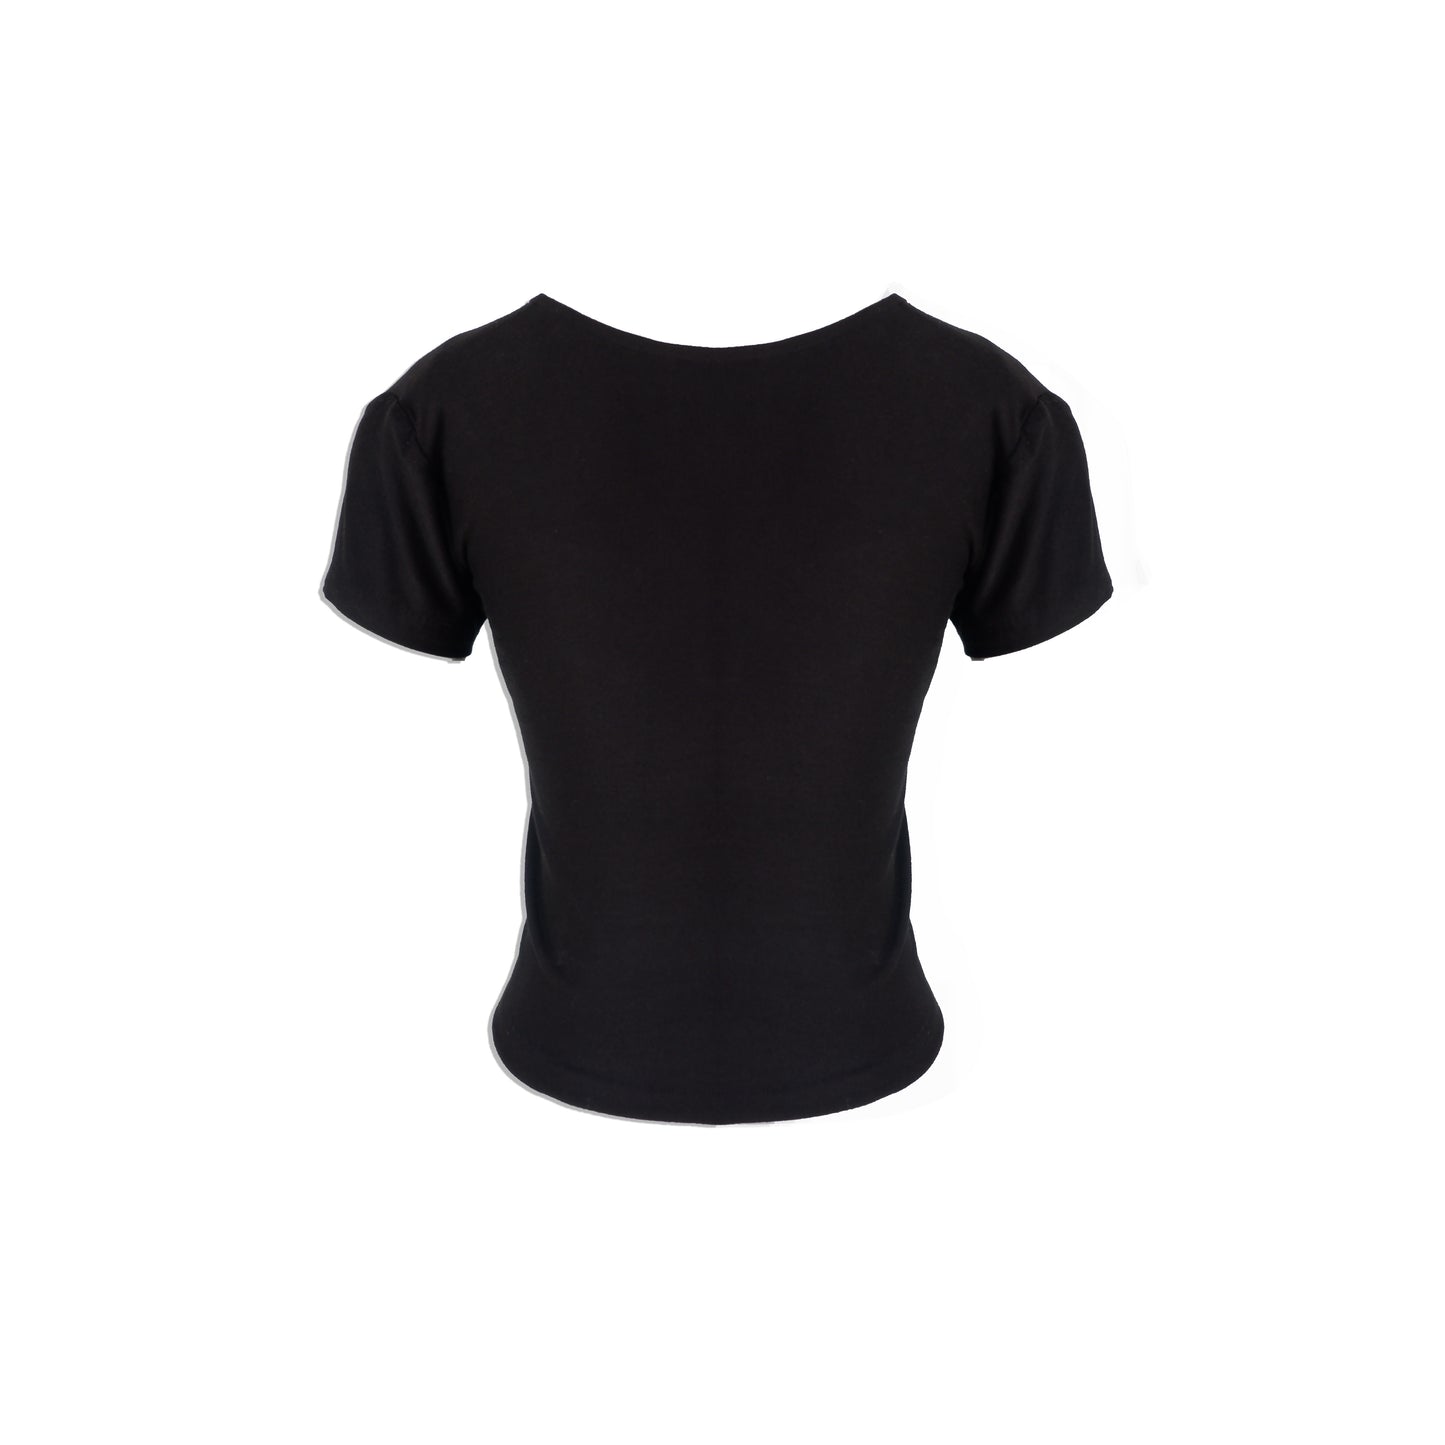 Black Modal Soft Jersey Double Knot with Lace Tee